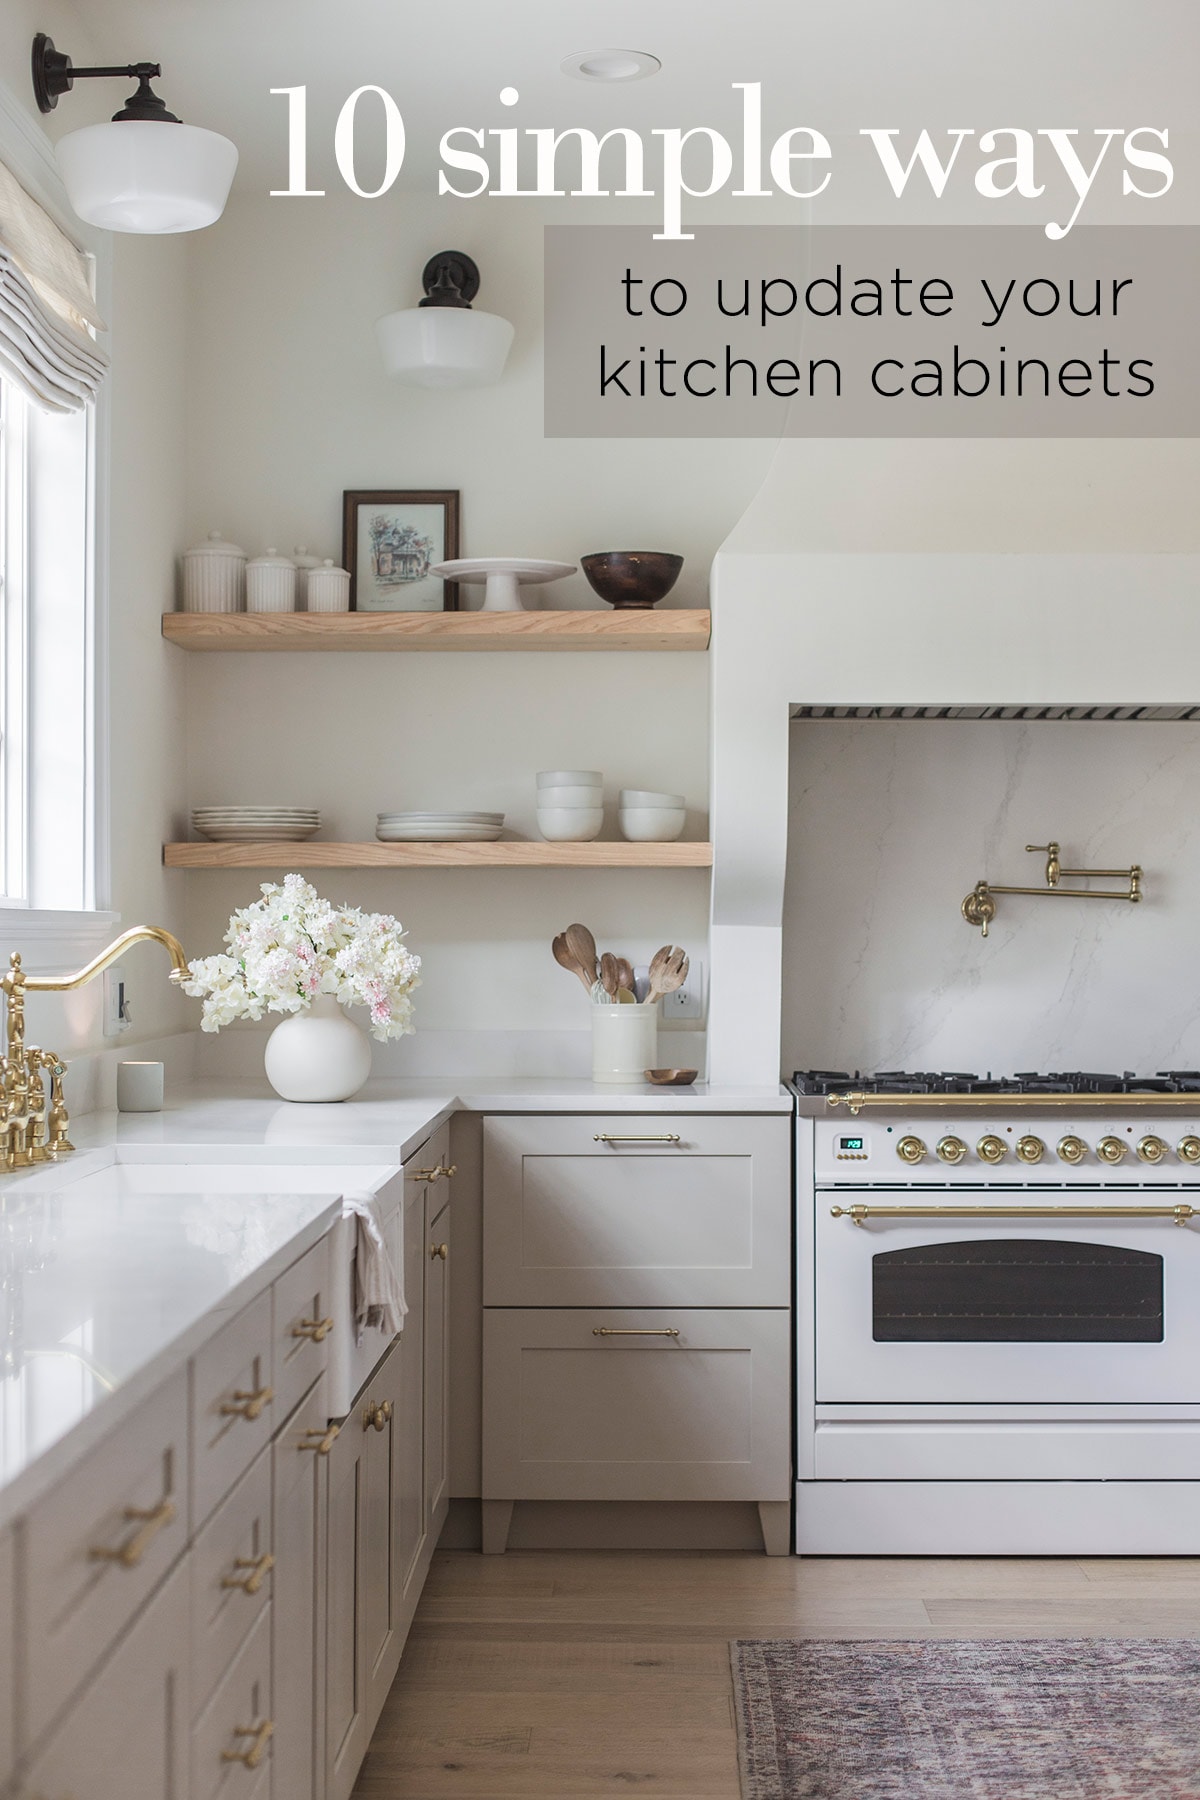 Replacement Shelving for Cabinets - Cabinet Doors 'N' More